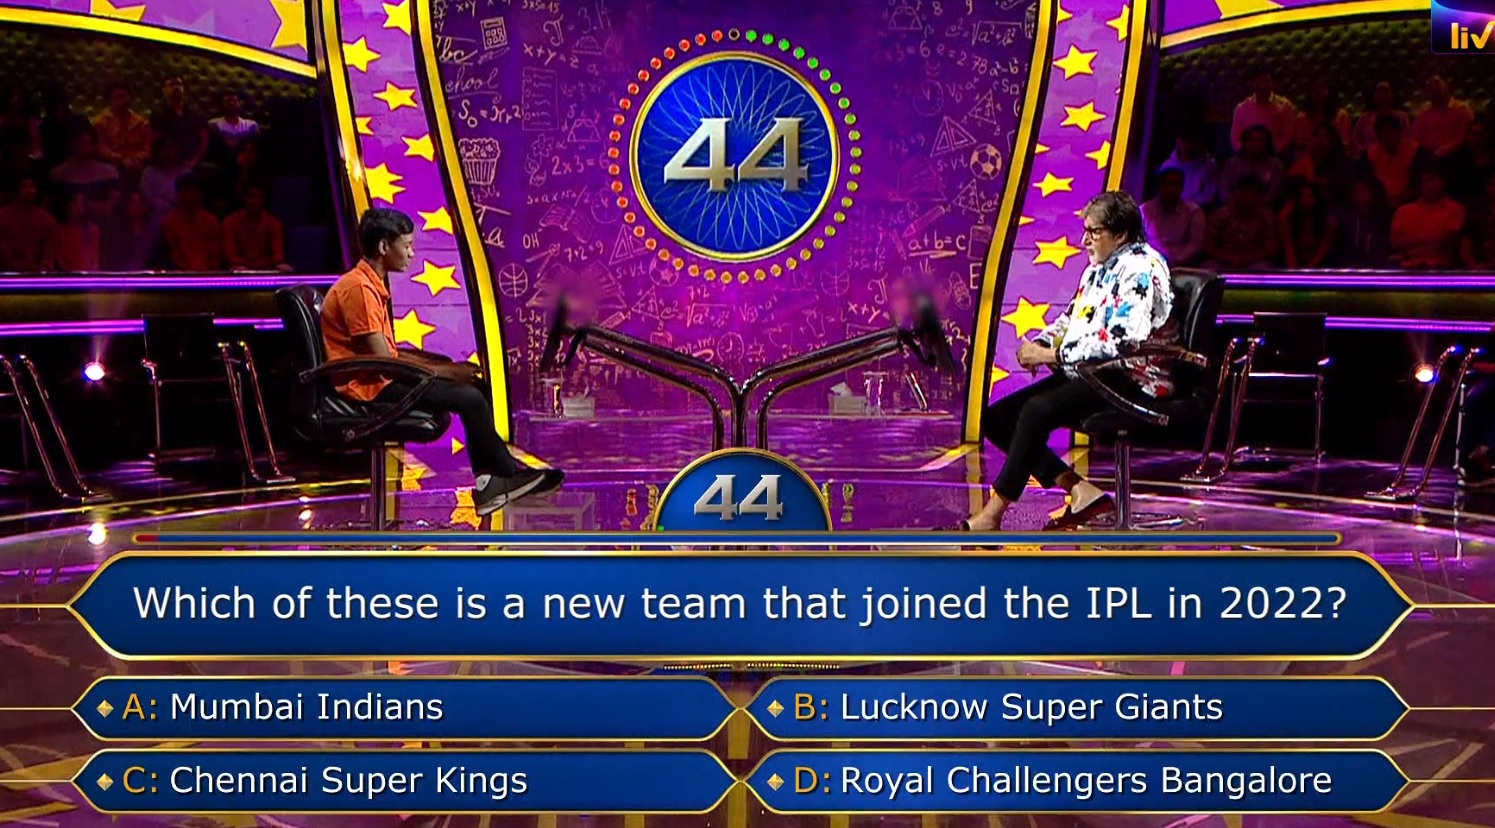 Ques : Which of these is a new team that joined the IPL in 2022?